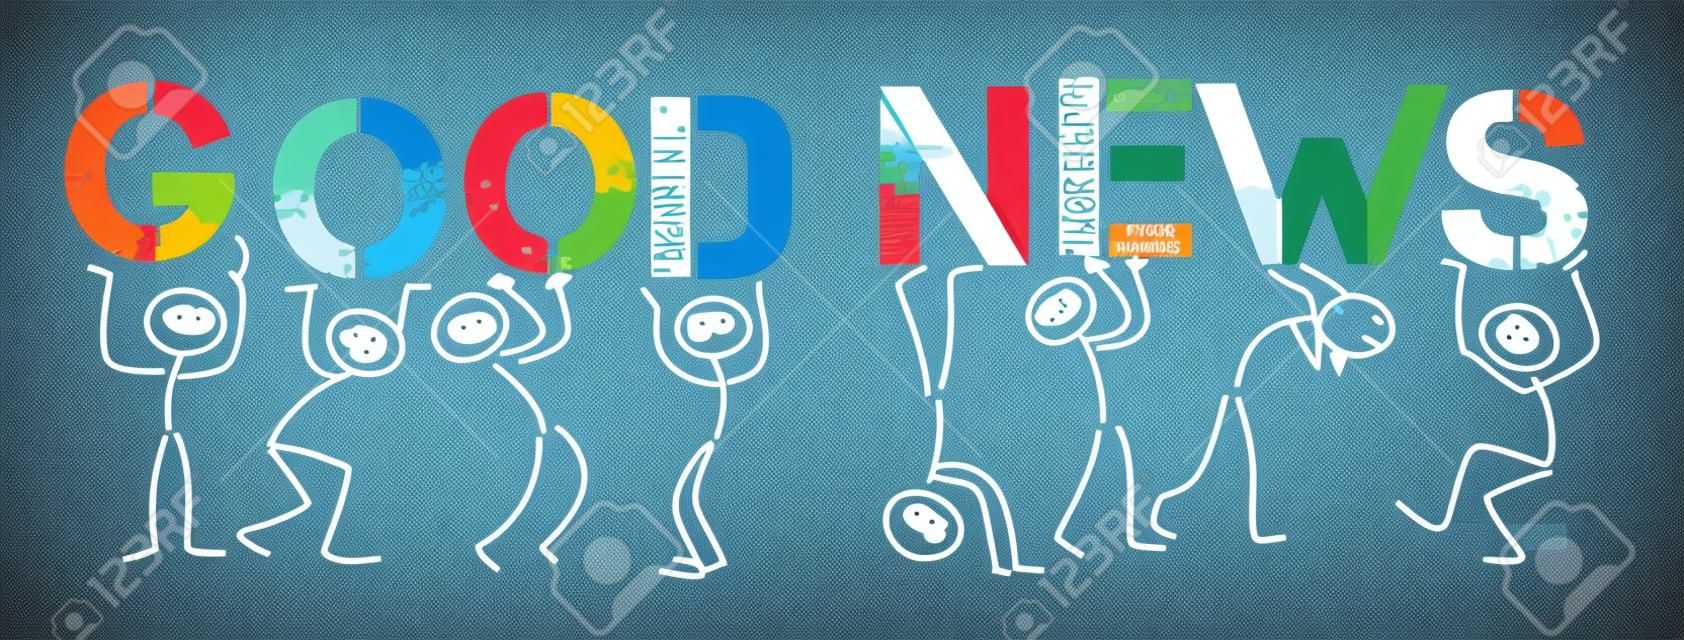 Stick figures holding the word "Good News". Vector banner with the text §Good News"